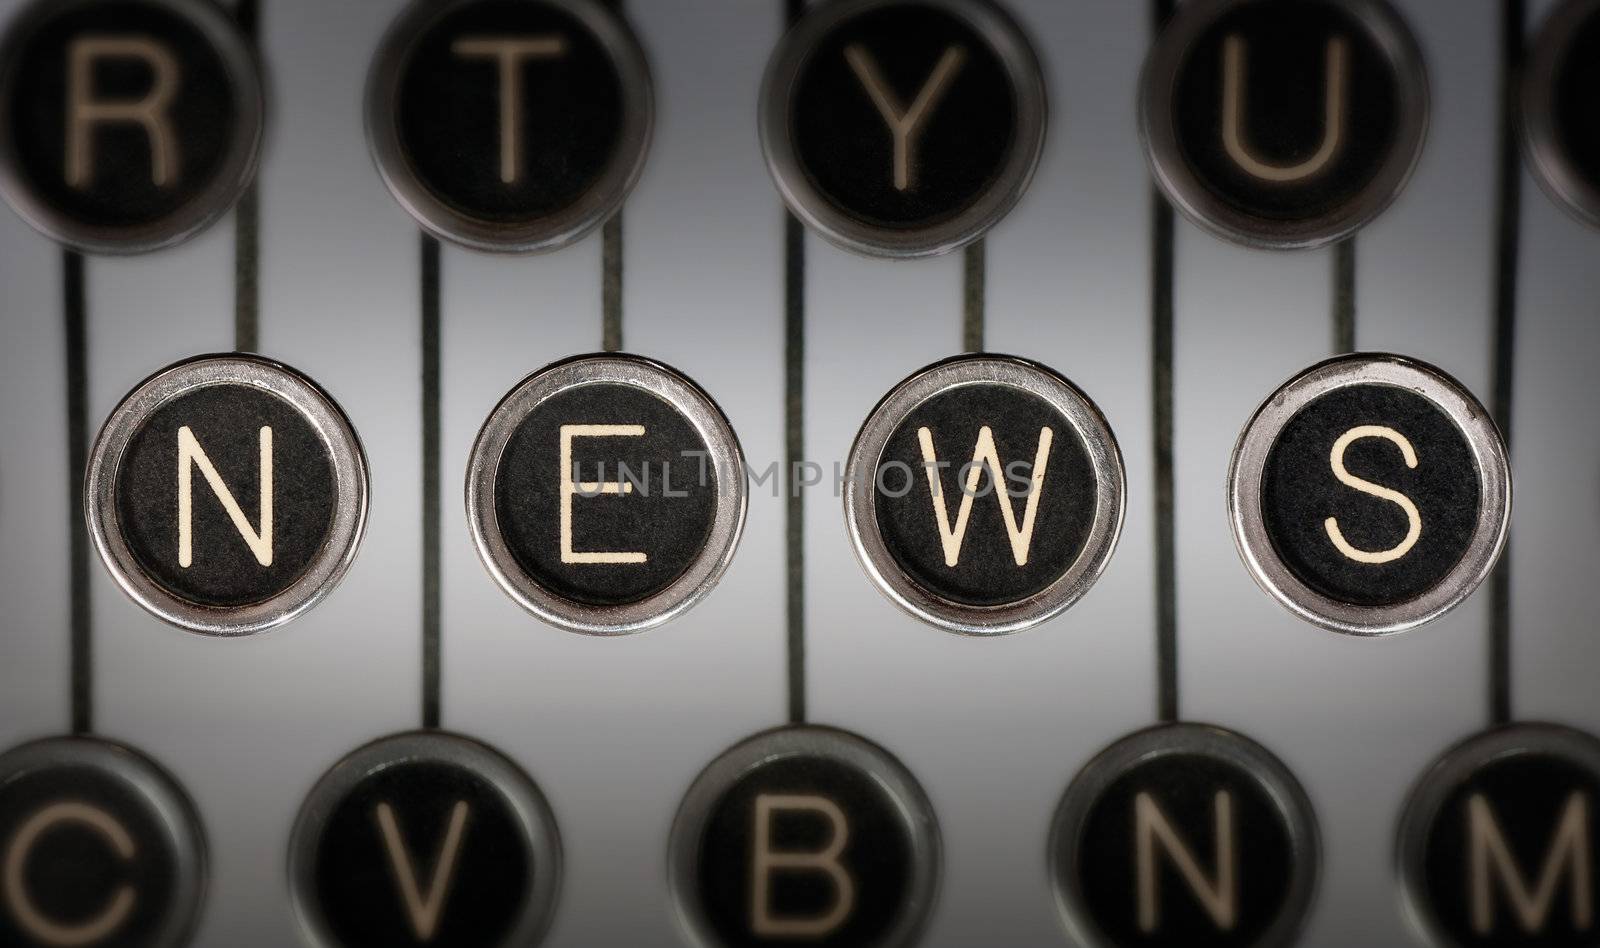 Close up of old typewriter keyboard with scratched chrome keys with black centers and white letters. Lighting and focus are centered on for keys spelling out "NEWS". 